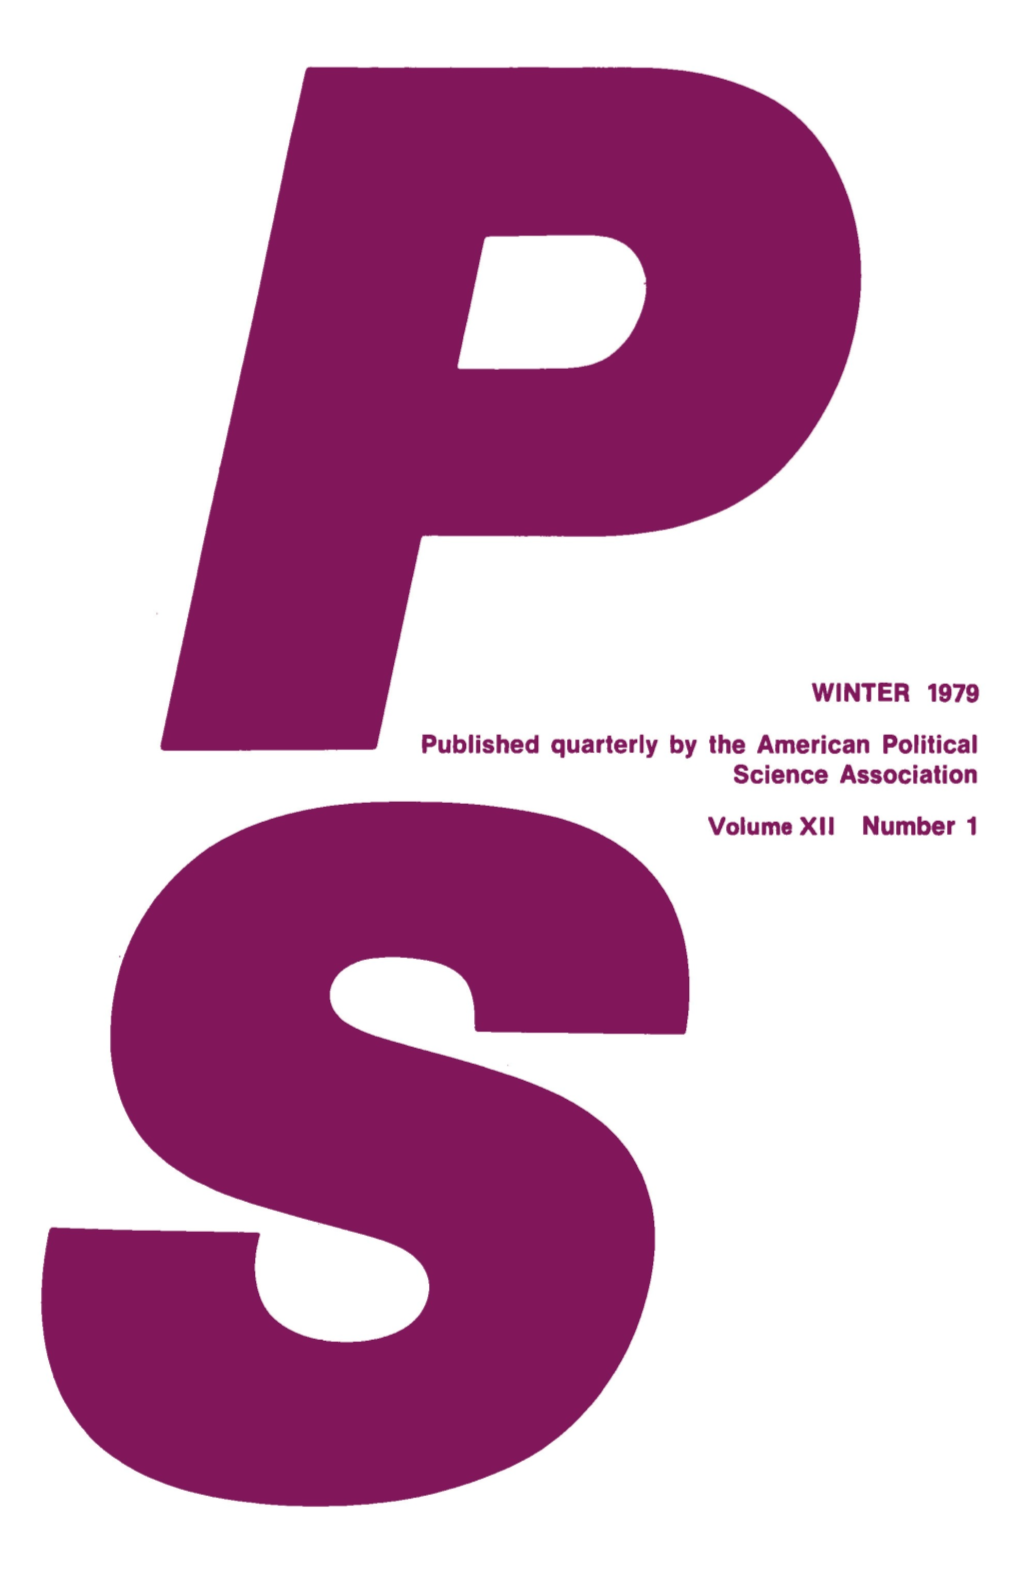 WINTER 1979 Published Quarterly by the American Political Science Association